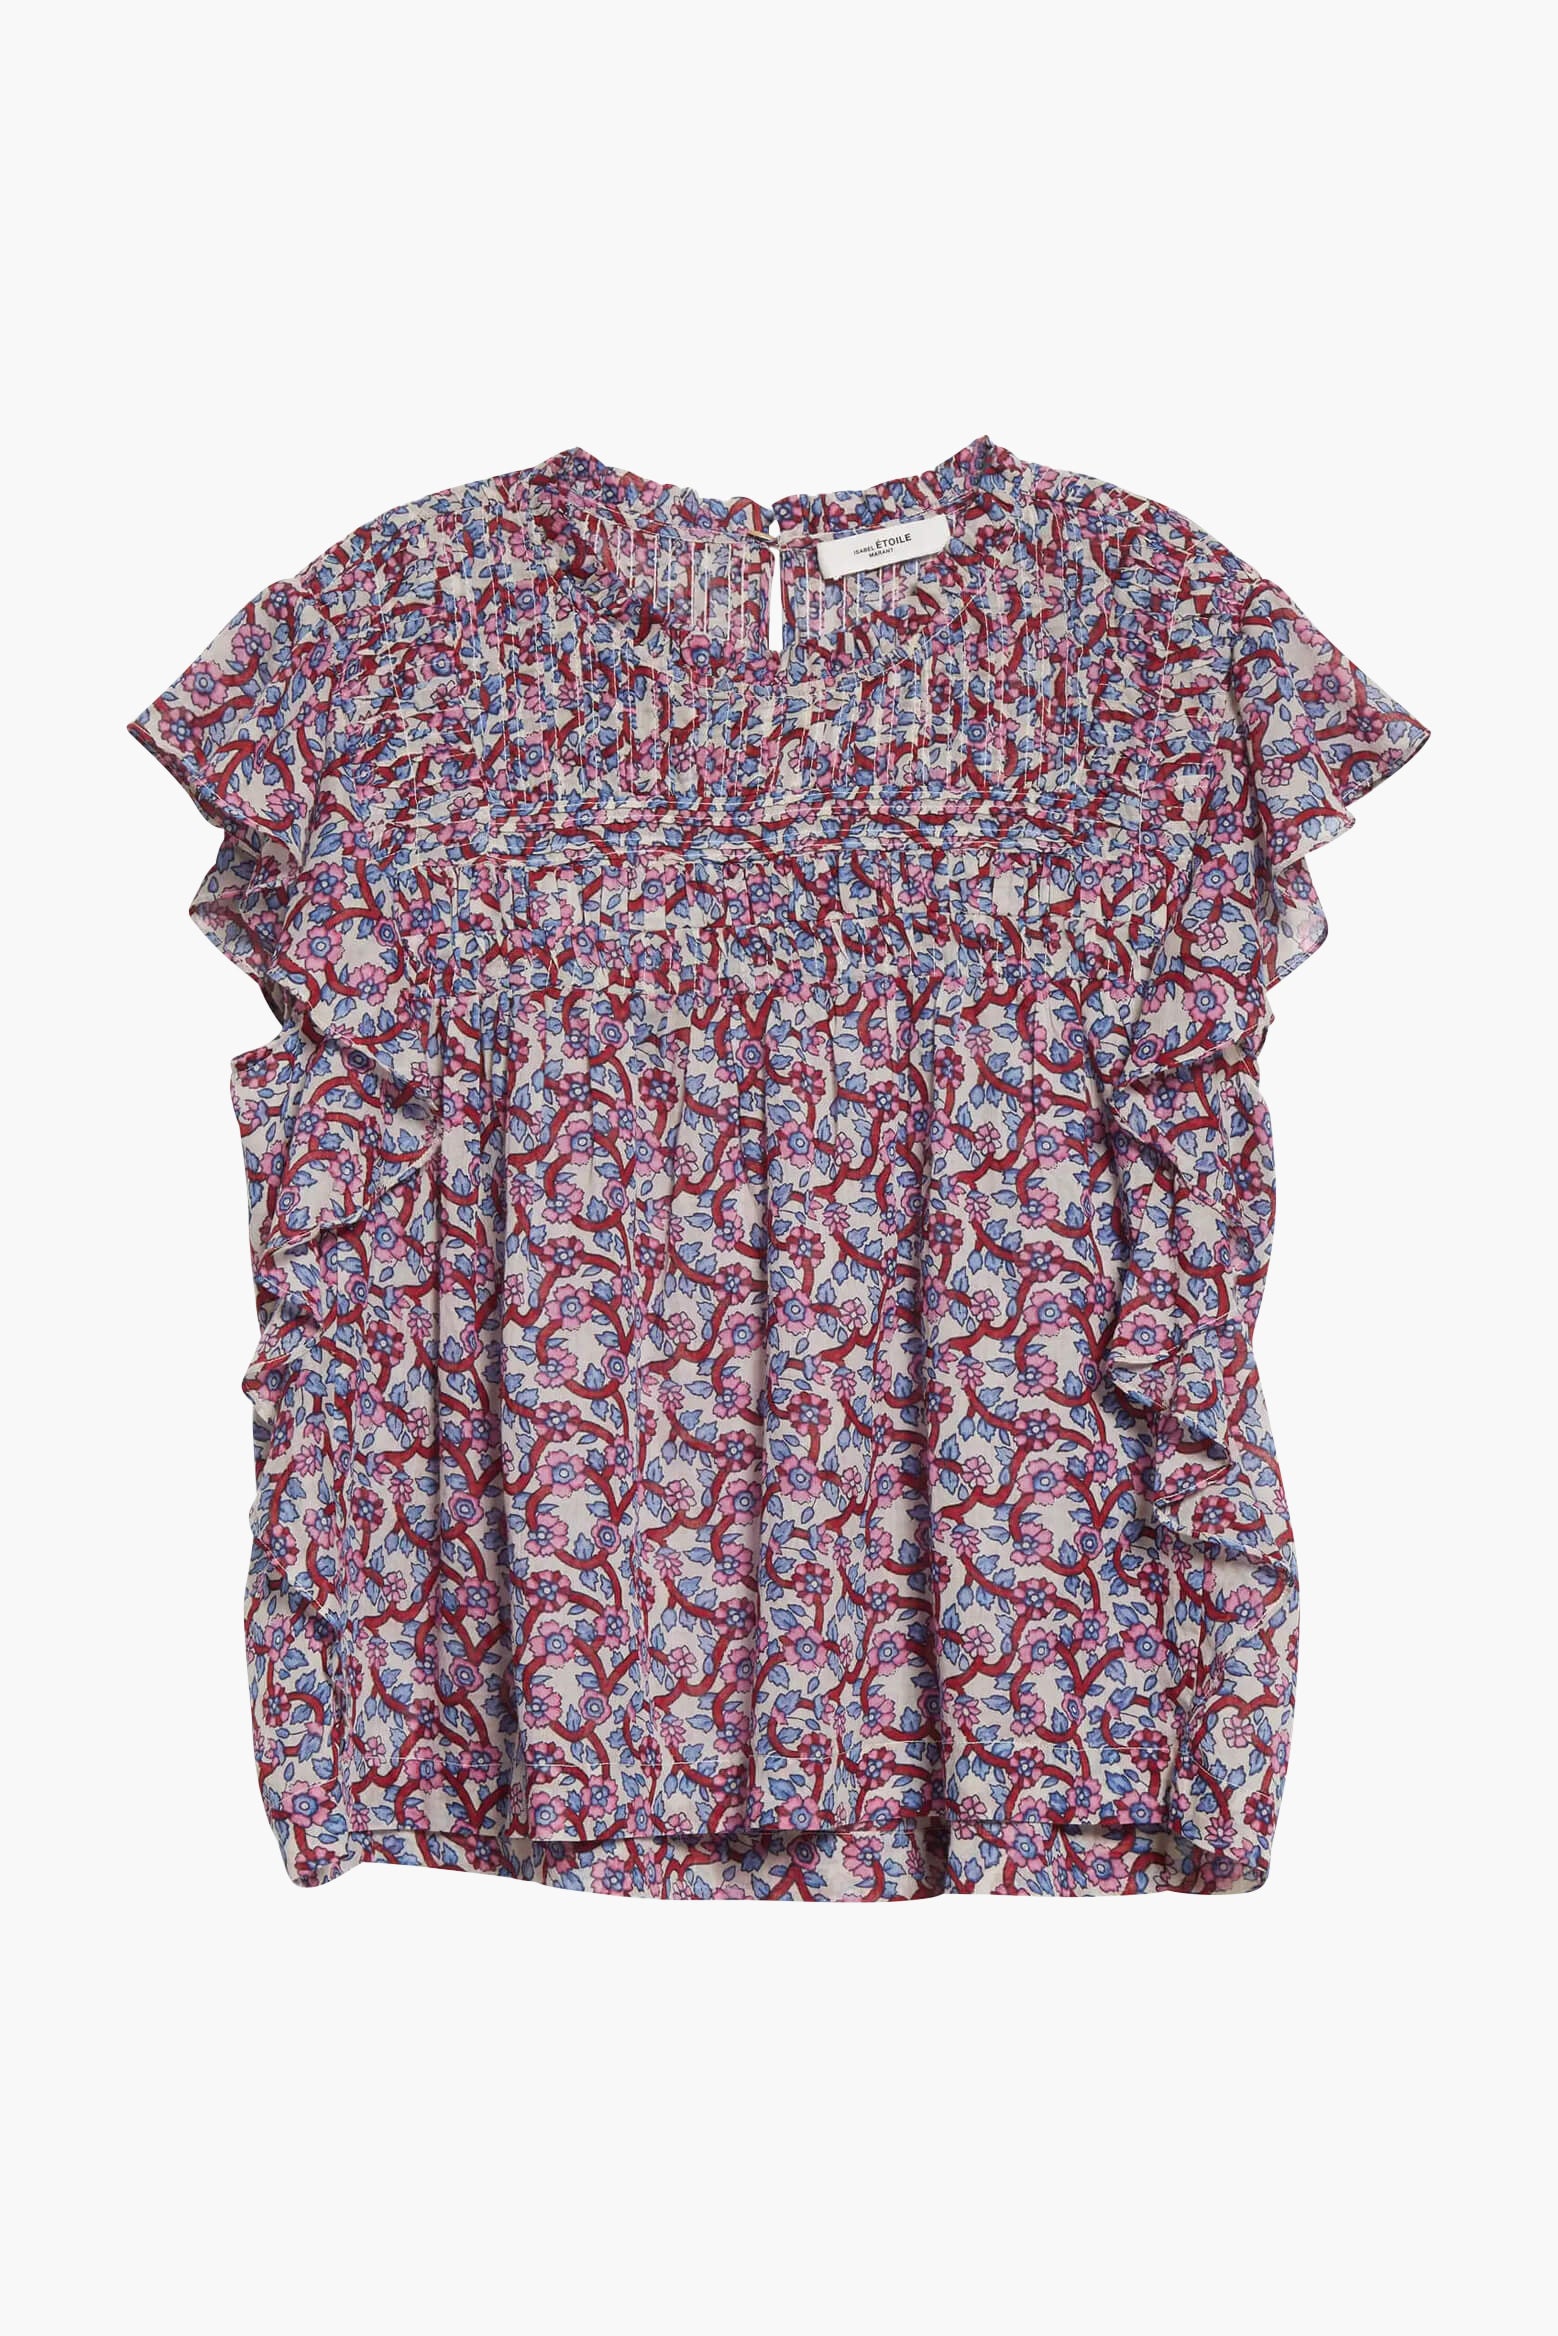 Isabel Marant Etoile Layona Top in Ecru available at TNT The New Trend Australia